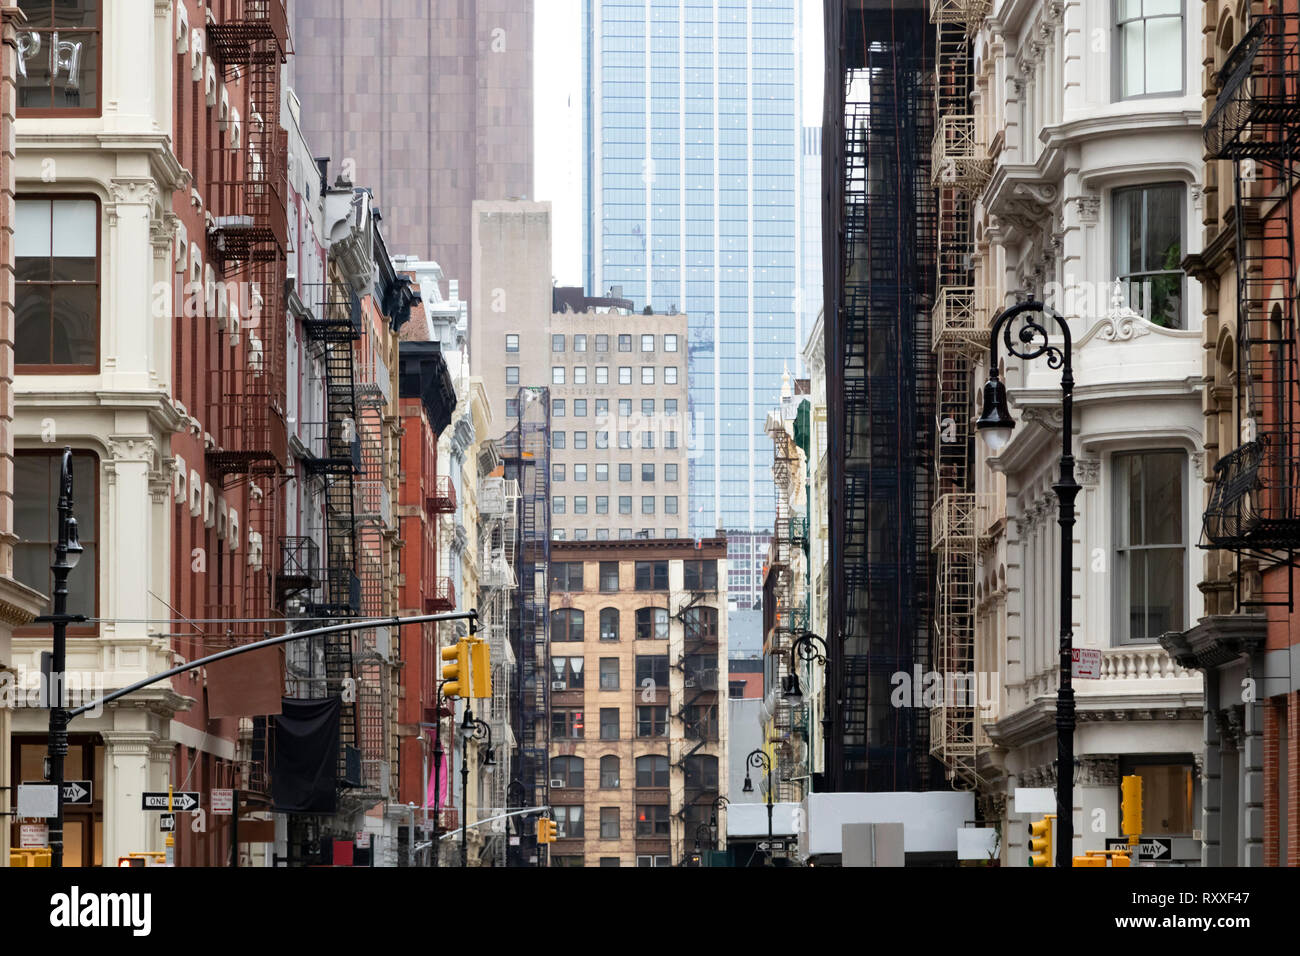 Crowded old buildings at the intersection of Broome and Greene Streets in SoHo New York City NYC Stock Photo